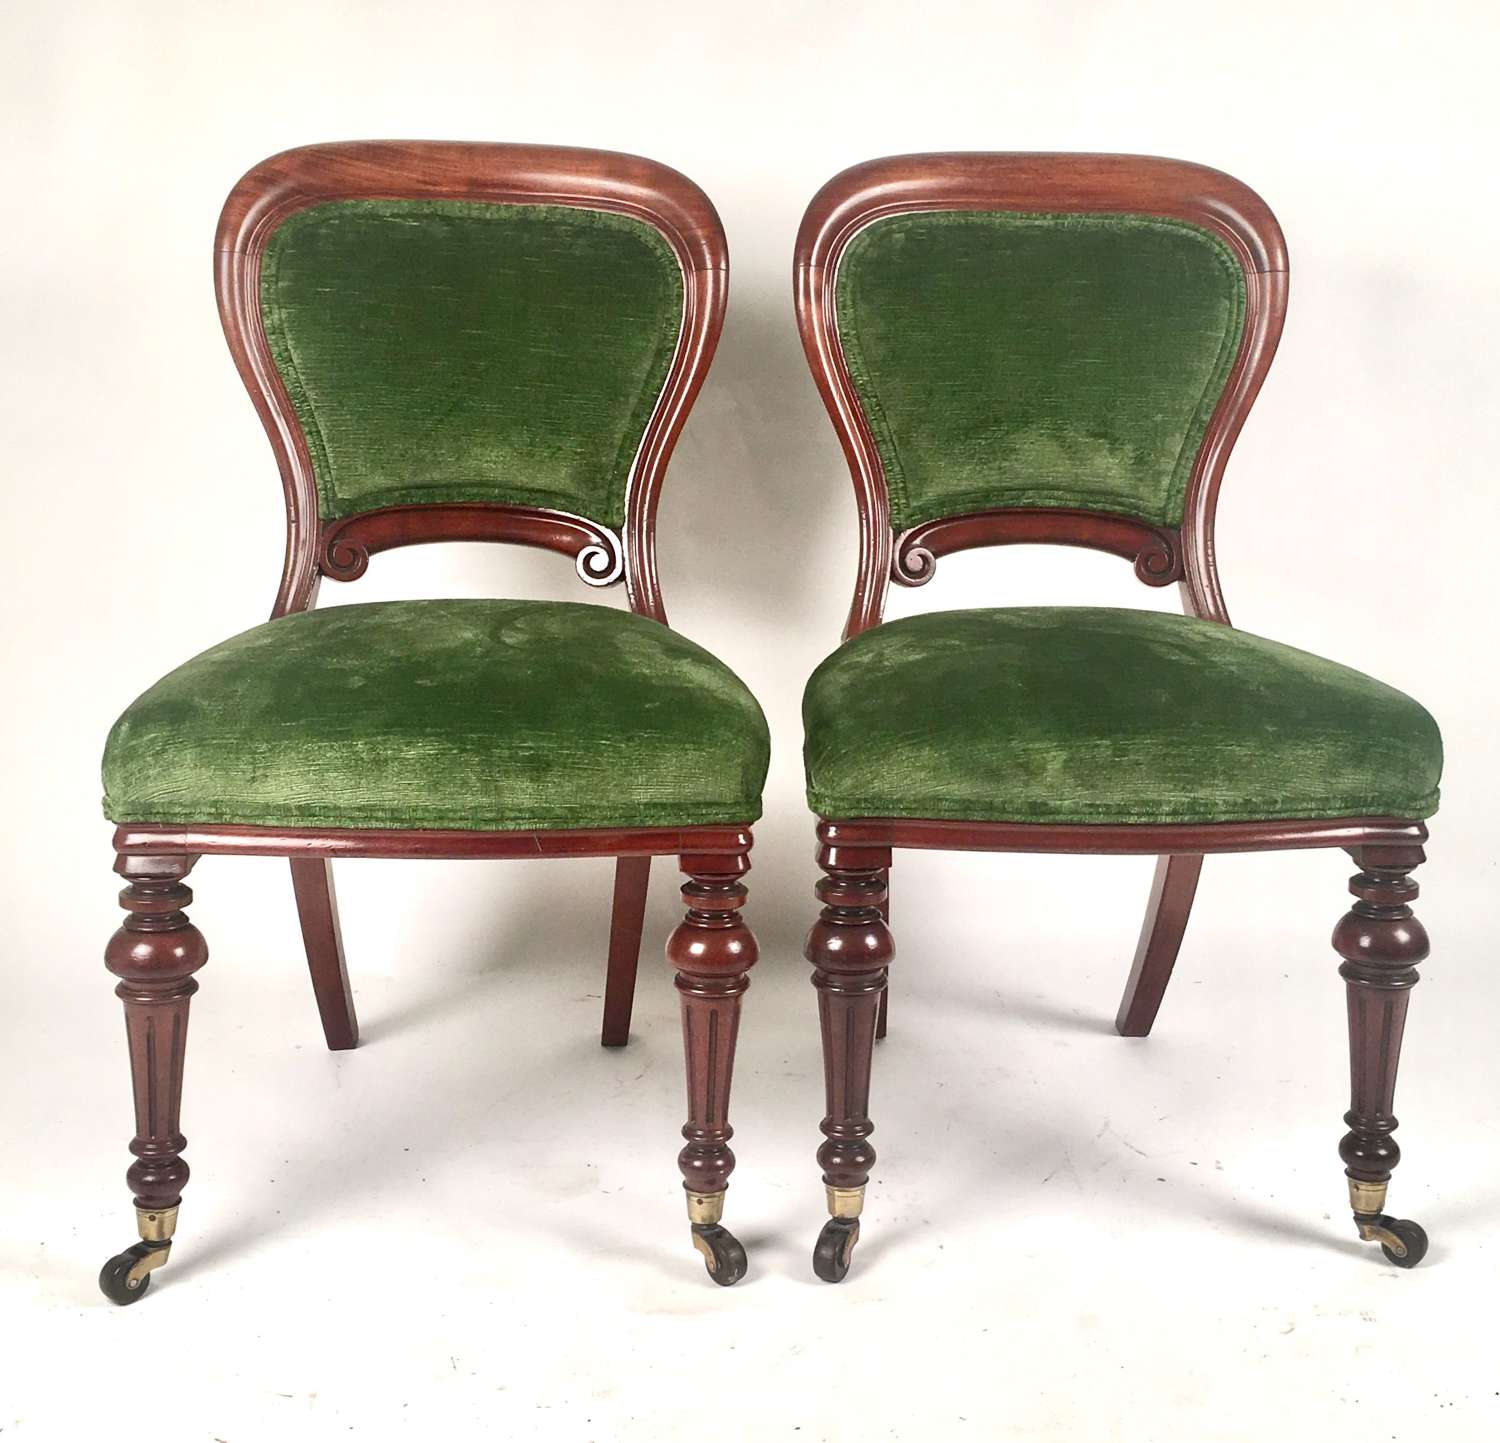 Pair of antique mahogany framed chairs